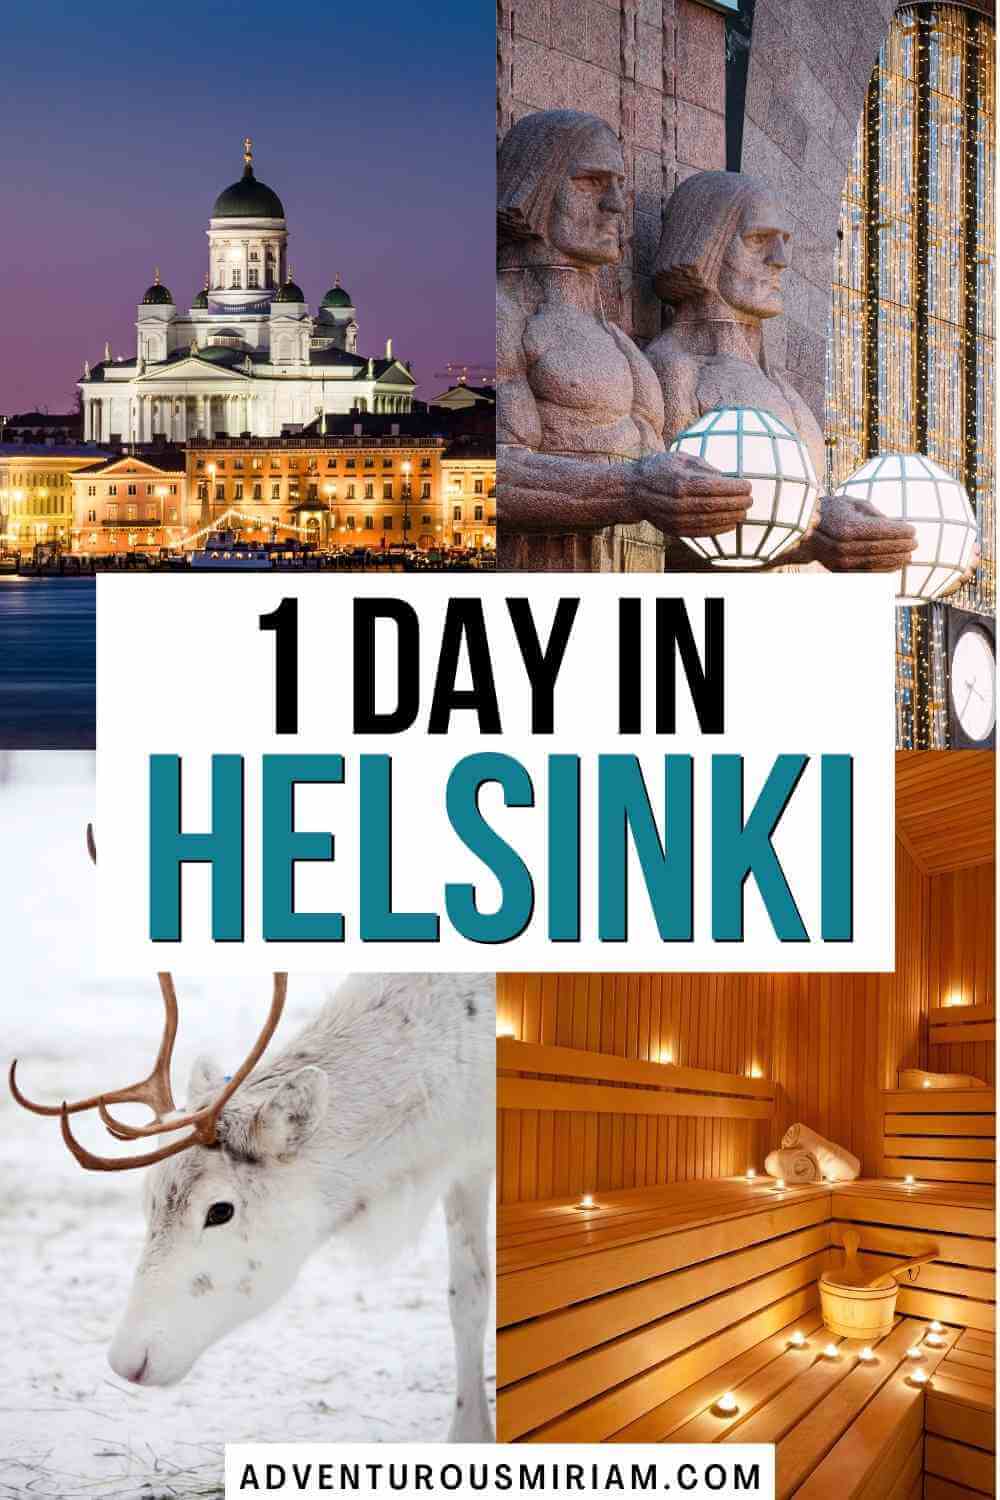 Helsinki Finland things to do. One day in Helsinki. Helsinki bucket list. Best things to do in Helsinki Finland. Findanlia Helsinki things to do.